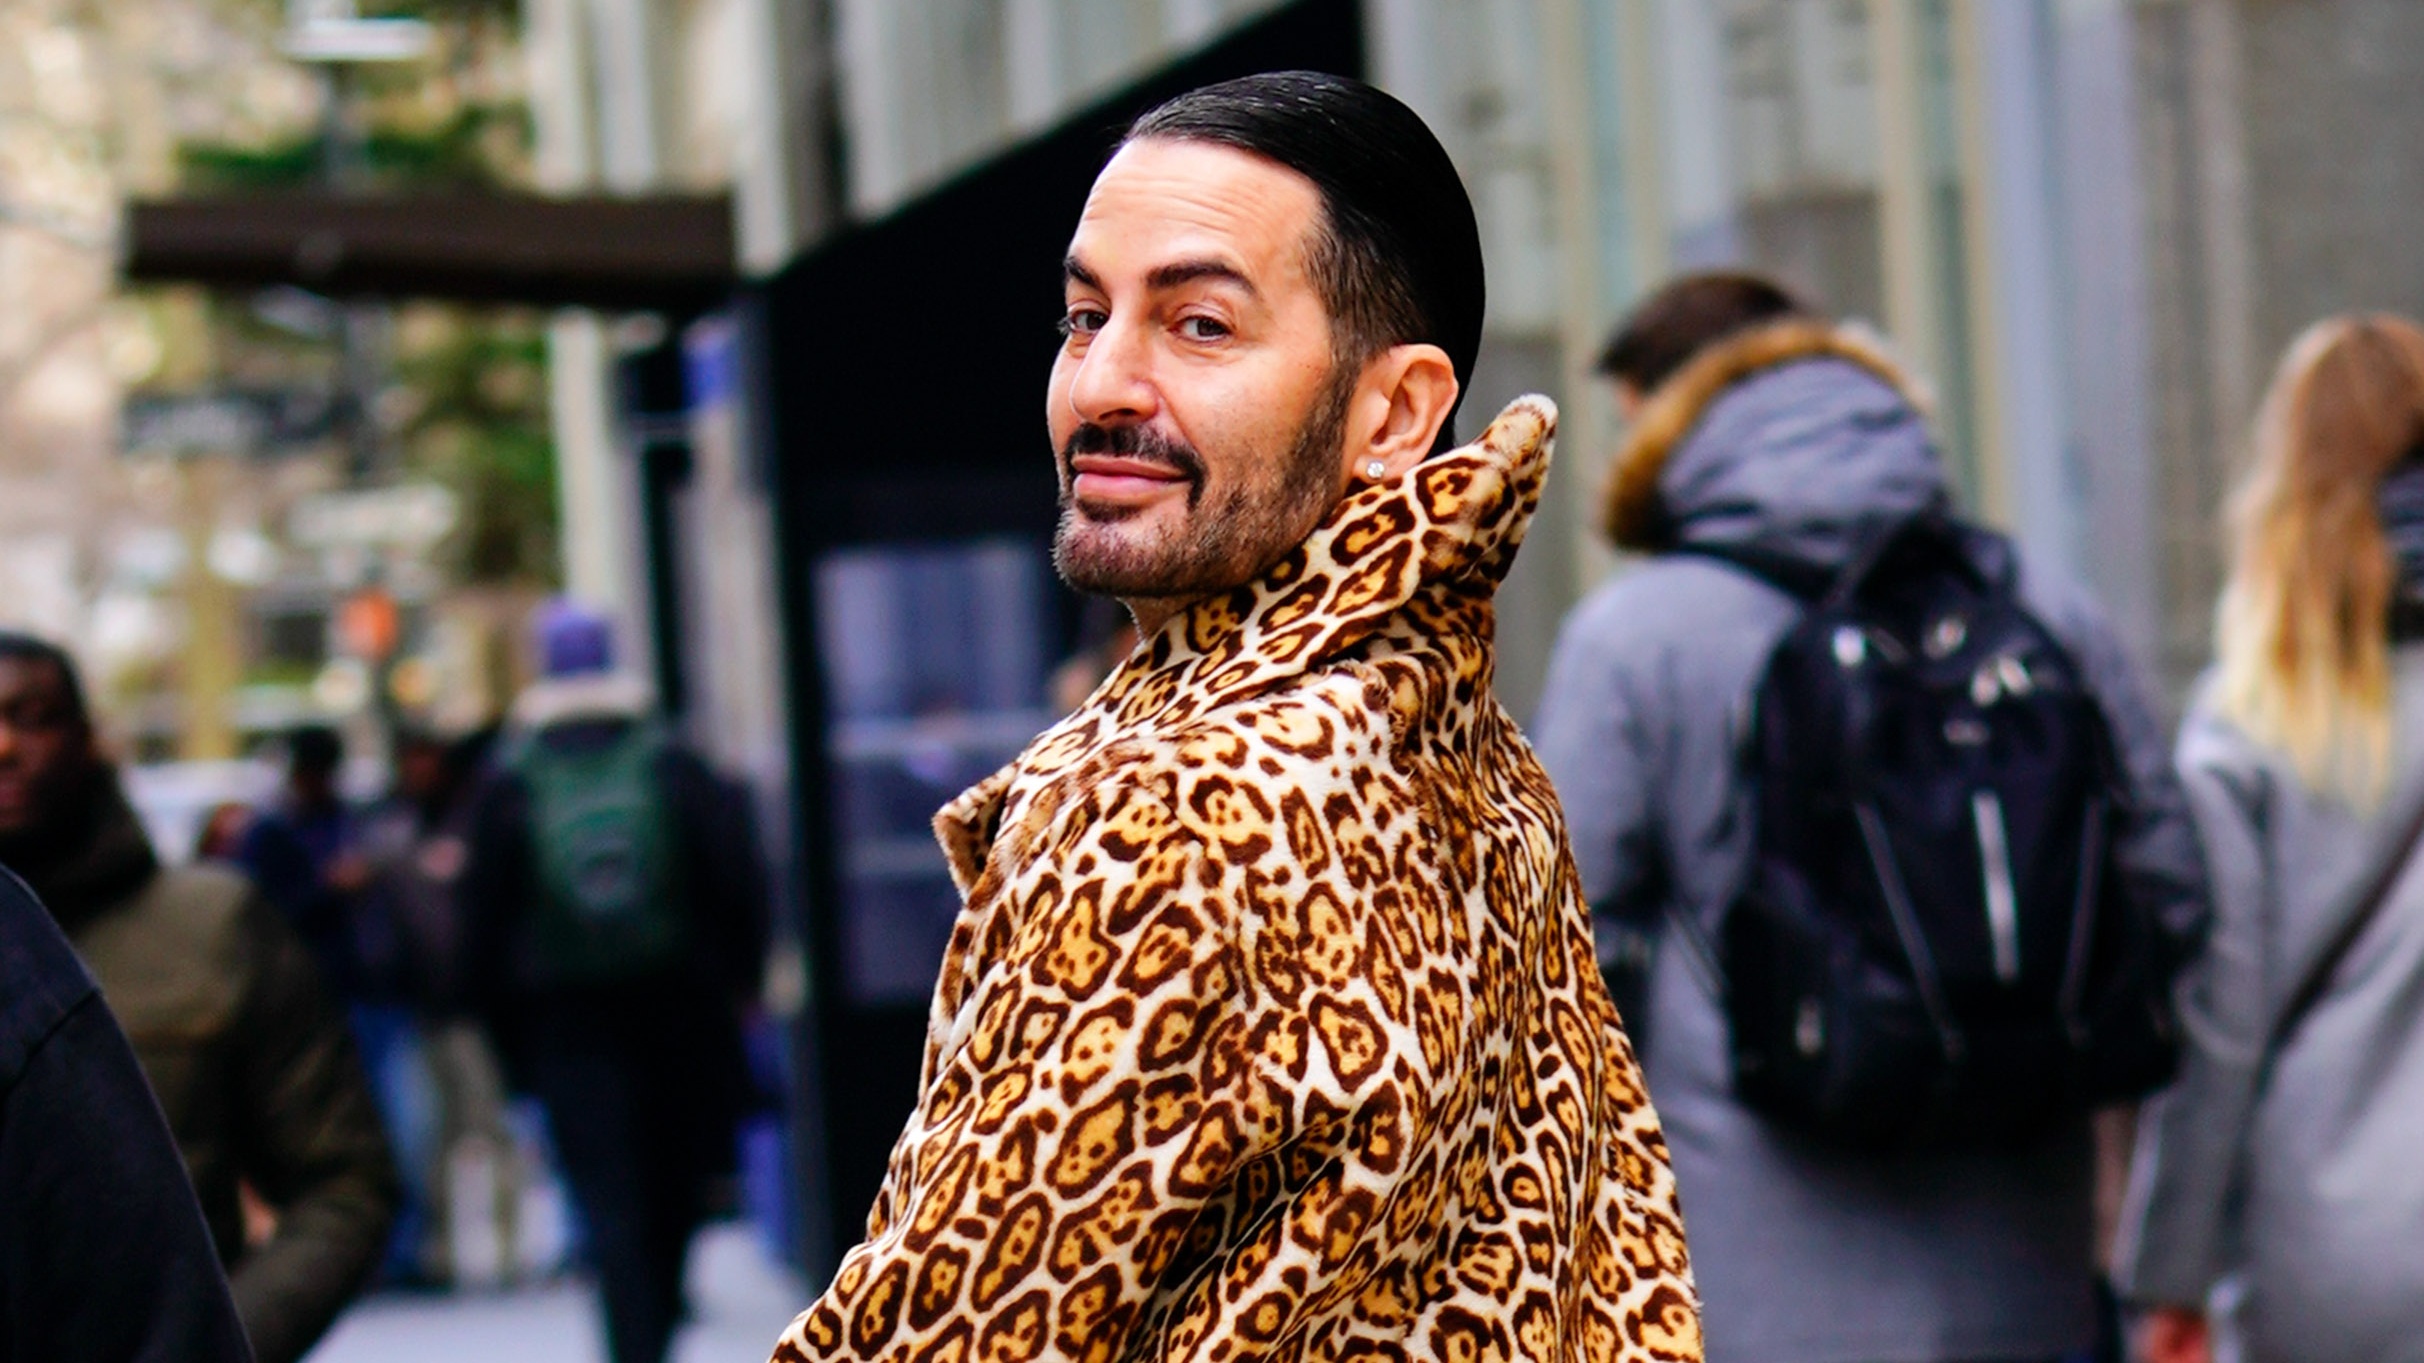 Marc Jacobs wears pink trousers and platform heels to get vaccine